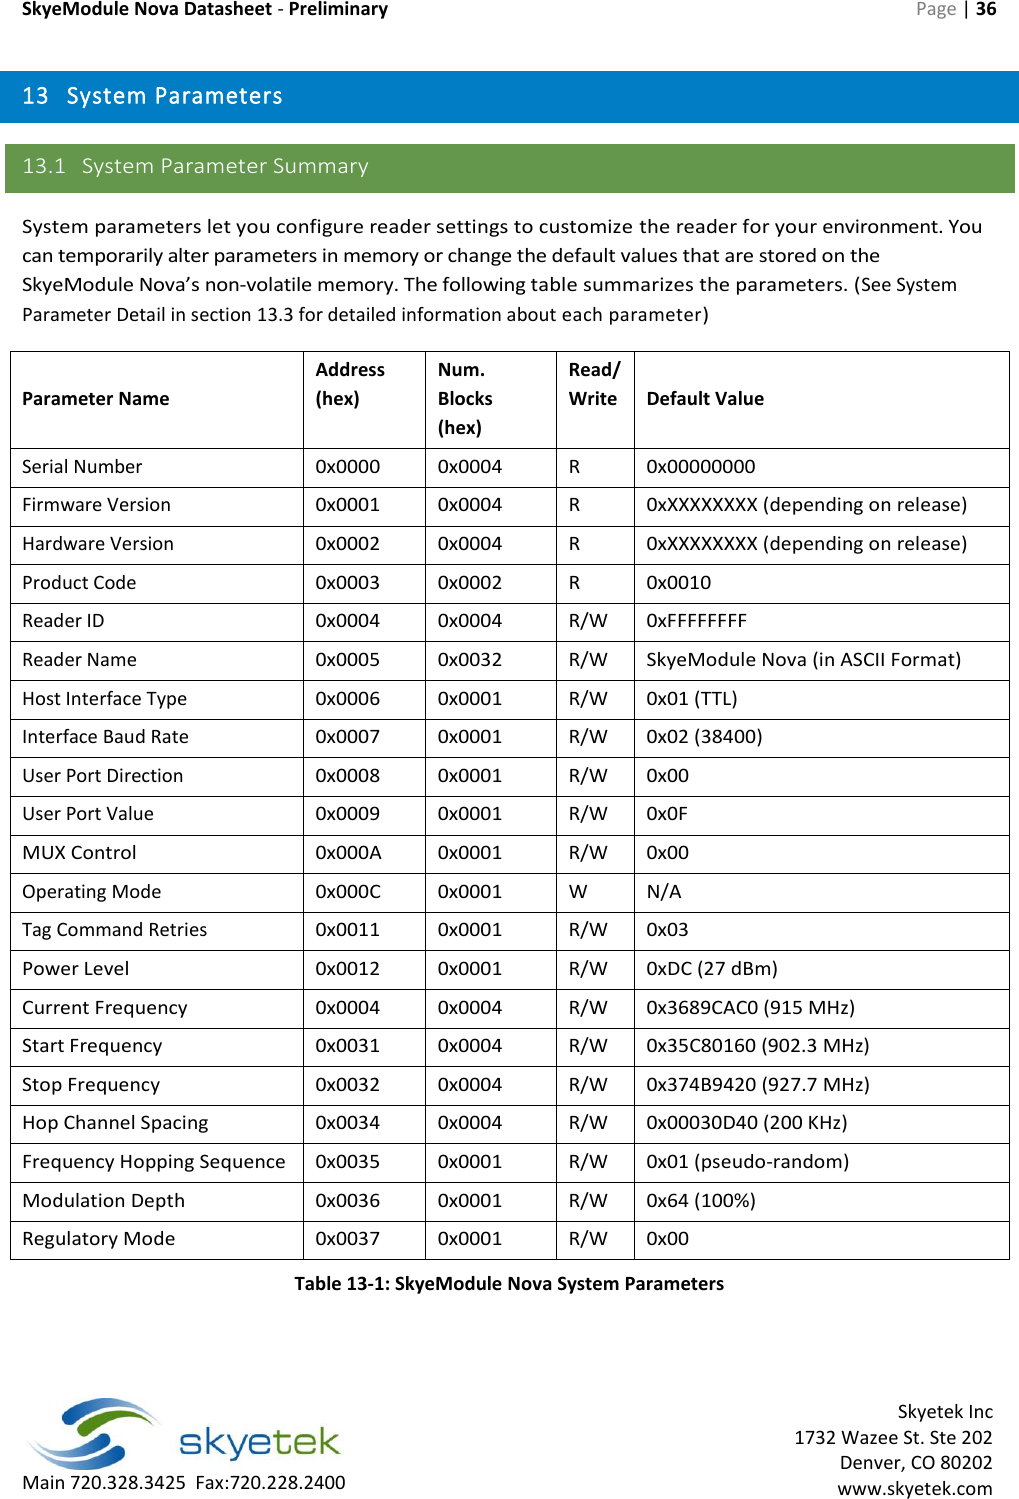 SkyeModule Nova Datasheet - Preliminary Page | 36  Skyetek Inc 1732 Wazee St. Ste 202 Denver, CO 80202 www.skyetek.com Main 720.328.3425  Fax:720.228.2400  13 System Parameters 13.1 System Parameter Summary System parameters let you configure reader settings to customize the reader for your environment. You can temporarily alter parameters in memory or change the default values that are stored on the SkyeModule Nova’s non-volatile memory. The following table summarizes the parameters. (See System Parameter Detail in section 13.3 for detailed information about each parameter) Parameter Name Address (hex) Num. Blocks (hex) Read/Write Default Value Serial Number 0x0000 0x0004 R 0x00000000 Firmware Version 0x0001 0x0004 R 0xXXXXXXXX (depending on release) Hardware Version 0x0002 0x0004 R 0xXXXXXXXX (depending on release) Product Code 0x0003 0x0002 R 0x0010 Reader ID 0x0004 0x0004 R/W 0xFFFFFFFF Reader Name 0x0005 0x0032 R/W SkyeModule Nova (in ASCII Format) Host Interface Type 0x0006 0x0001 R/W 0x01 (TTL) Interface Baud Rate 0x0007 0x0001 R/W 0x02 (38400) User Port Direction 0x0008 0x0001 R/W 0x00 User Port Value 0x0009 0x0001 R/W 0x0F MUX Control 0x000A 0x0001 R/W 0x00 Operating Mode 0x000C 0x0001 W N/A Tag Command Retries 0x0011 0x0001 R/W 0x03 Power Level 0x0012 0x0001 R/W 0xDC (27 dBm) Current Frequency 0x0004 0x0004 R/W 0x3689CAC0 (915 MHz) Start Frequency 0x0031 0x0004 R/W 0x35C80160 (902.3 MHz) Stop Frequency 0x0032 0x0004 R/W 0x374B9420 (927.7 MHz) Hop Channel Spacing 0x0034 0x0004 R/W 0x00030D40 (200 KHz) Frequency Hopping Sequence 0x0035 0x0001 R/W 0x01 (pseudo-random) Modulation Depth 0x0036 0x0001 R/W 0x64 (100%) Regulatory Mode 0x0037 0x0001 R/W 0x00 Table 13-1: SkyeModule Nova System Parameters  